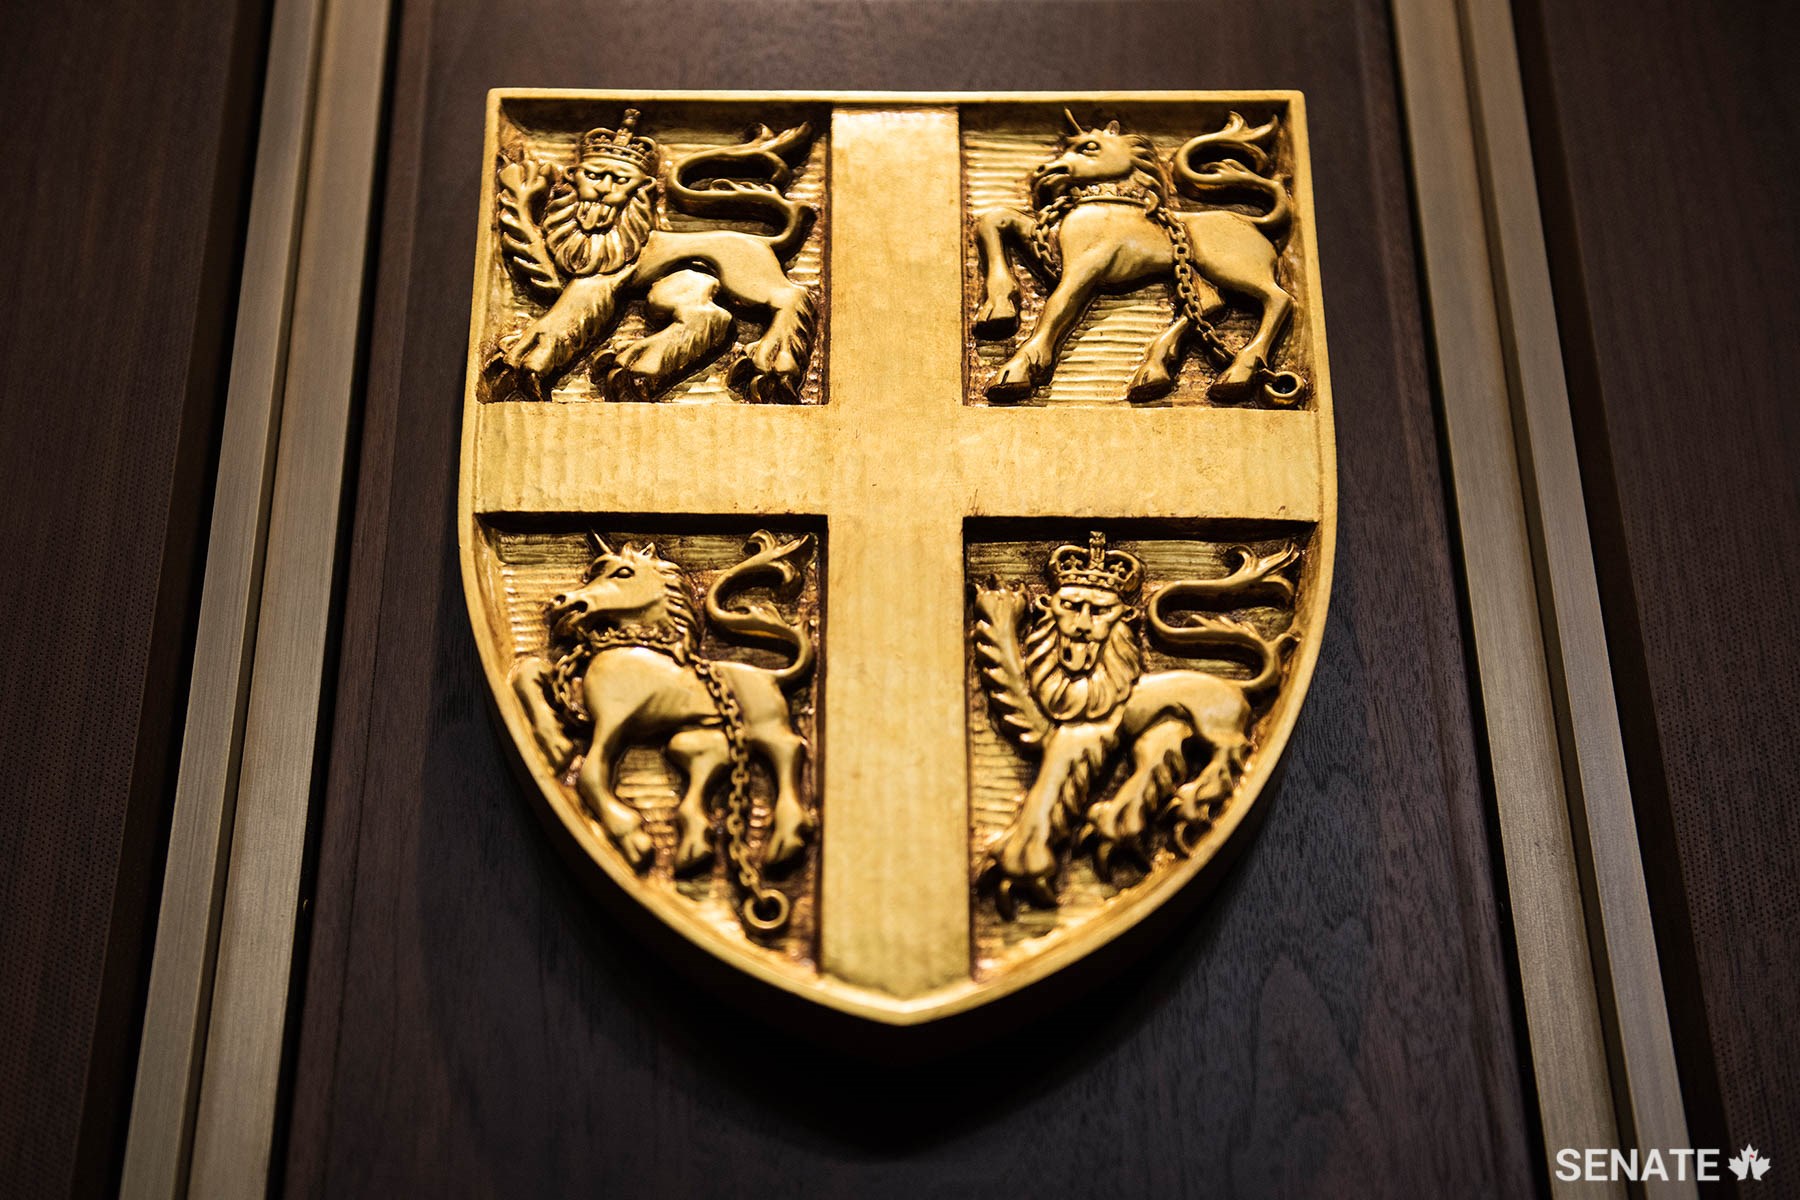 English lions, Scottish unicorns and the Cross of St. George form the elements of the shield of Newfoundland and Labrador.